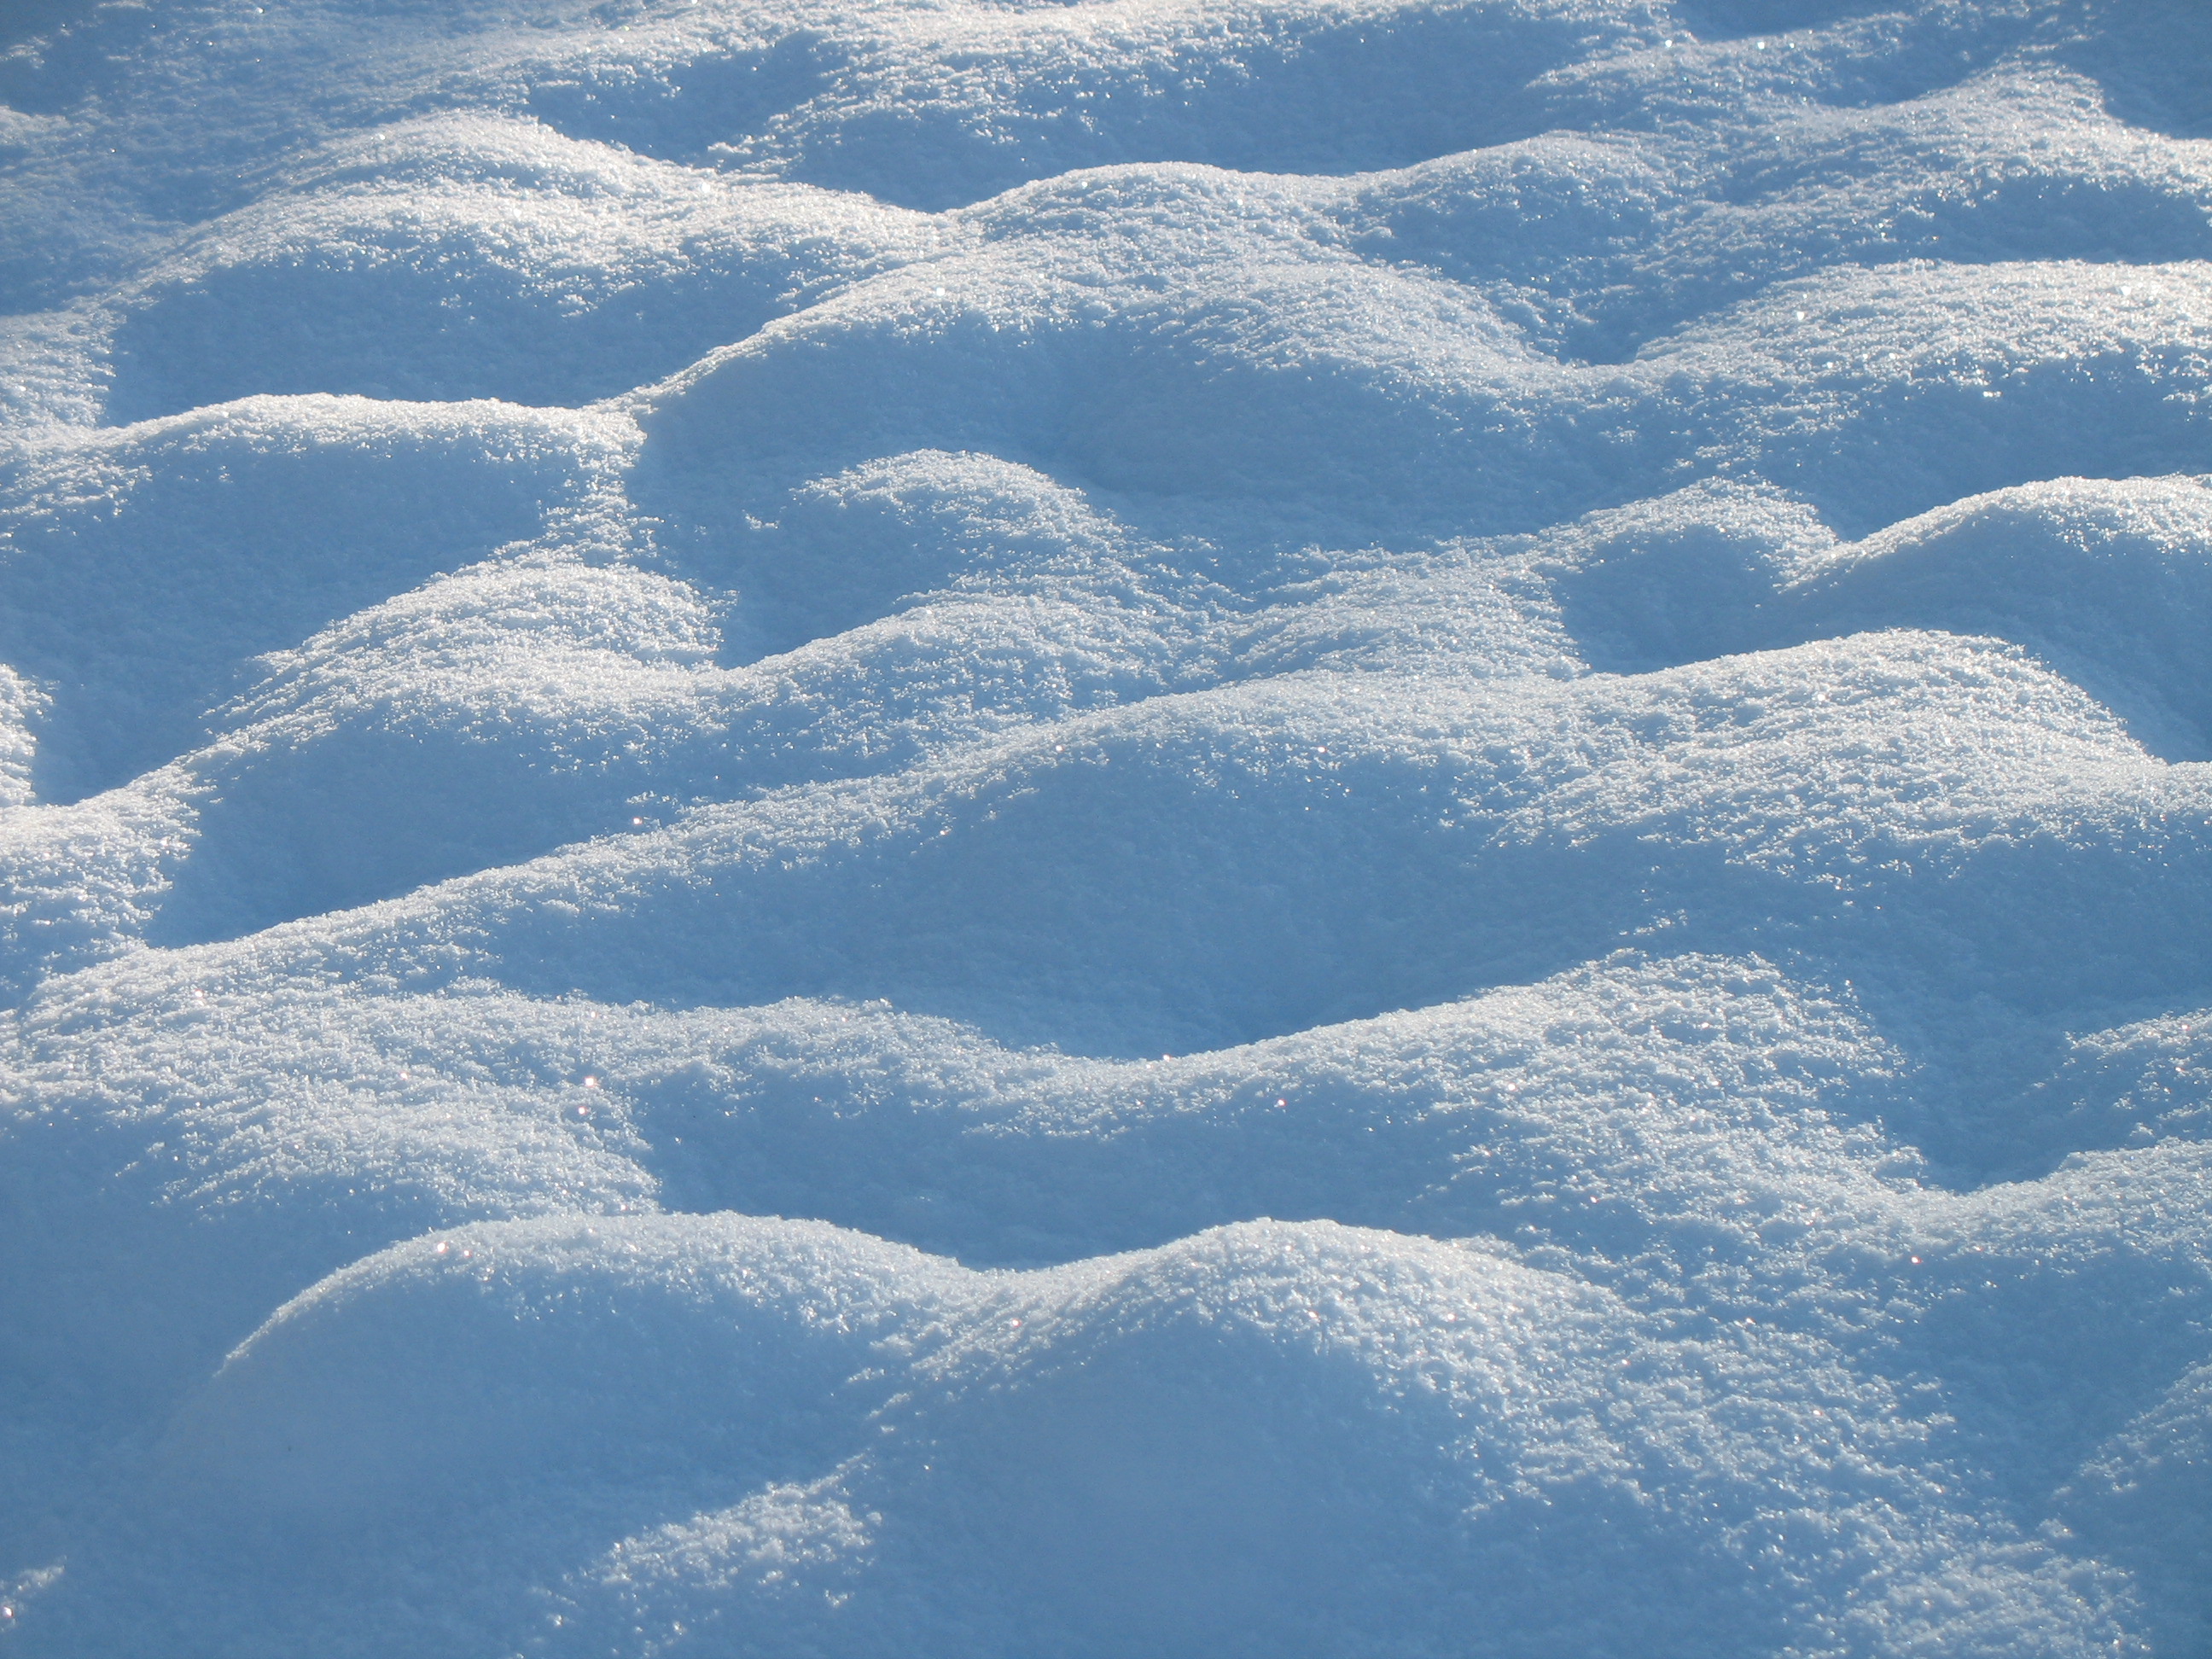 Field-with-snow-champ-enneige.jpg